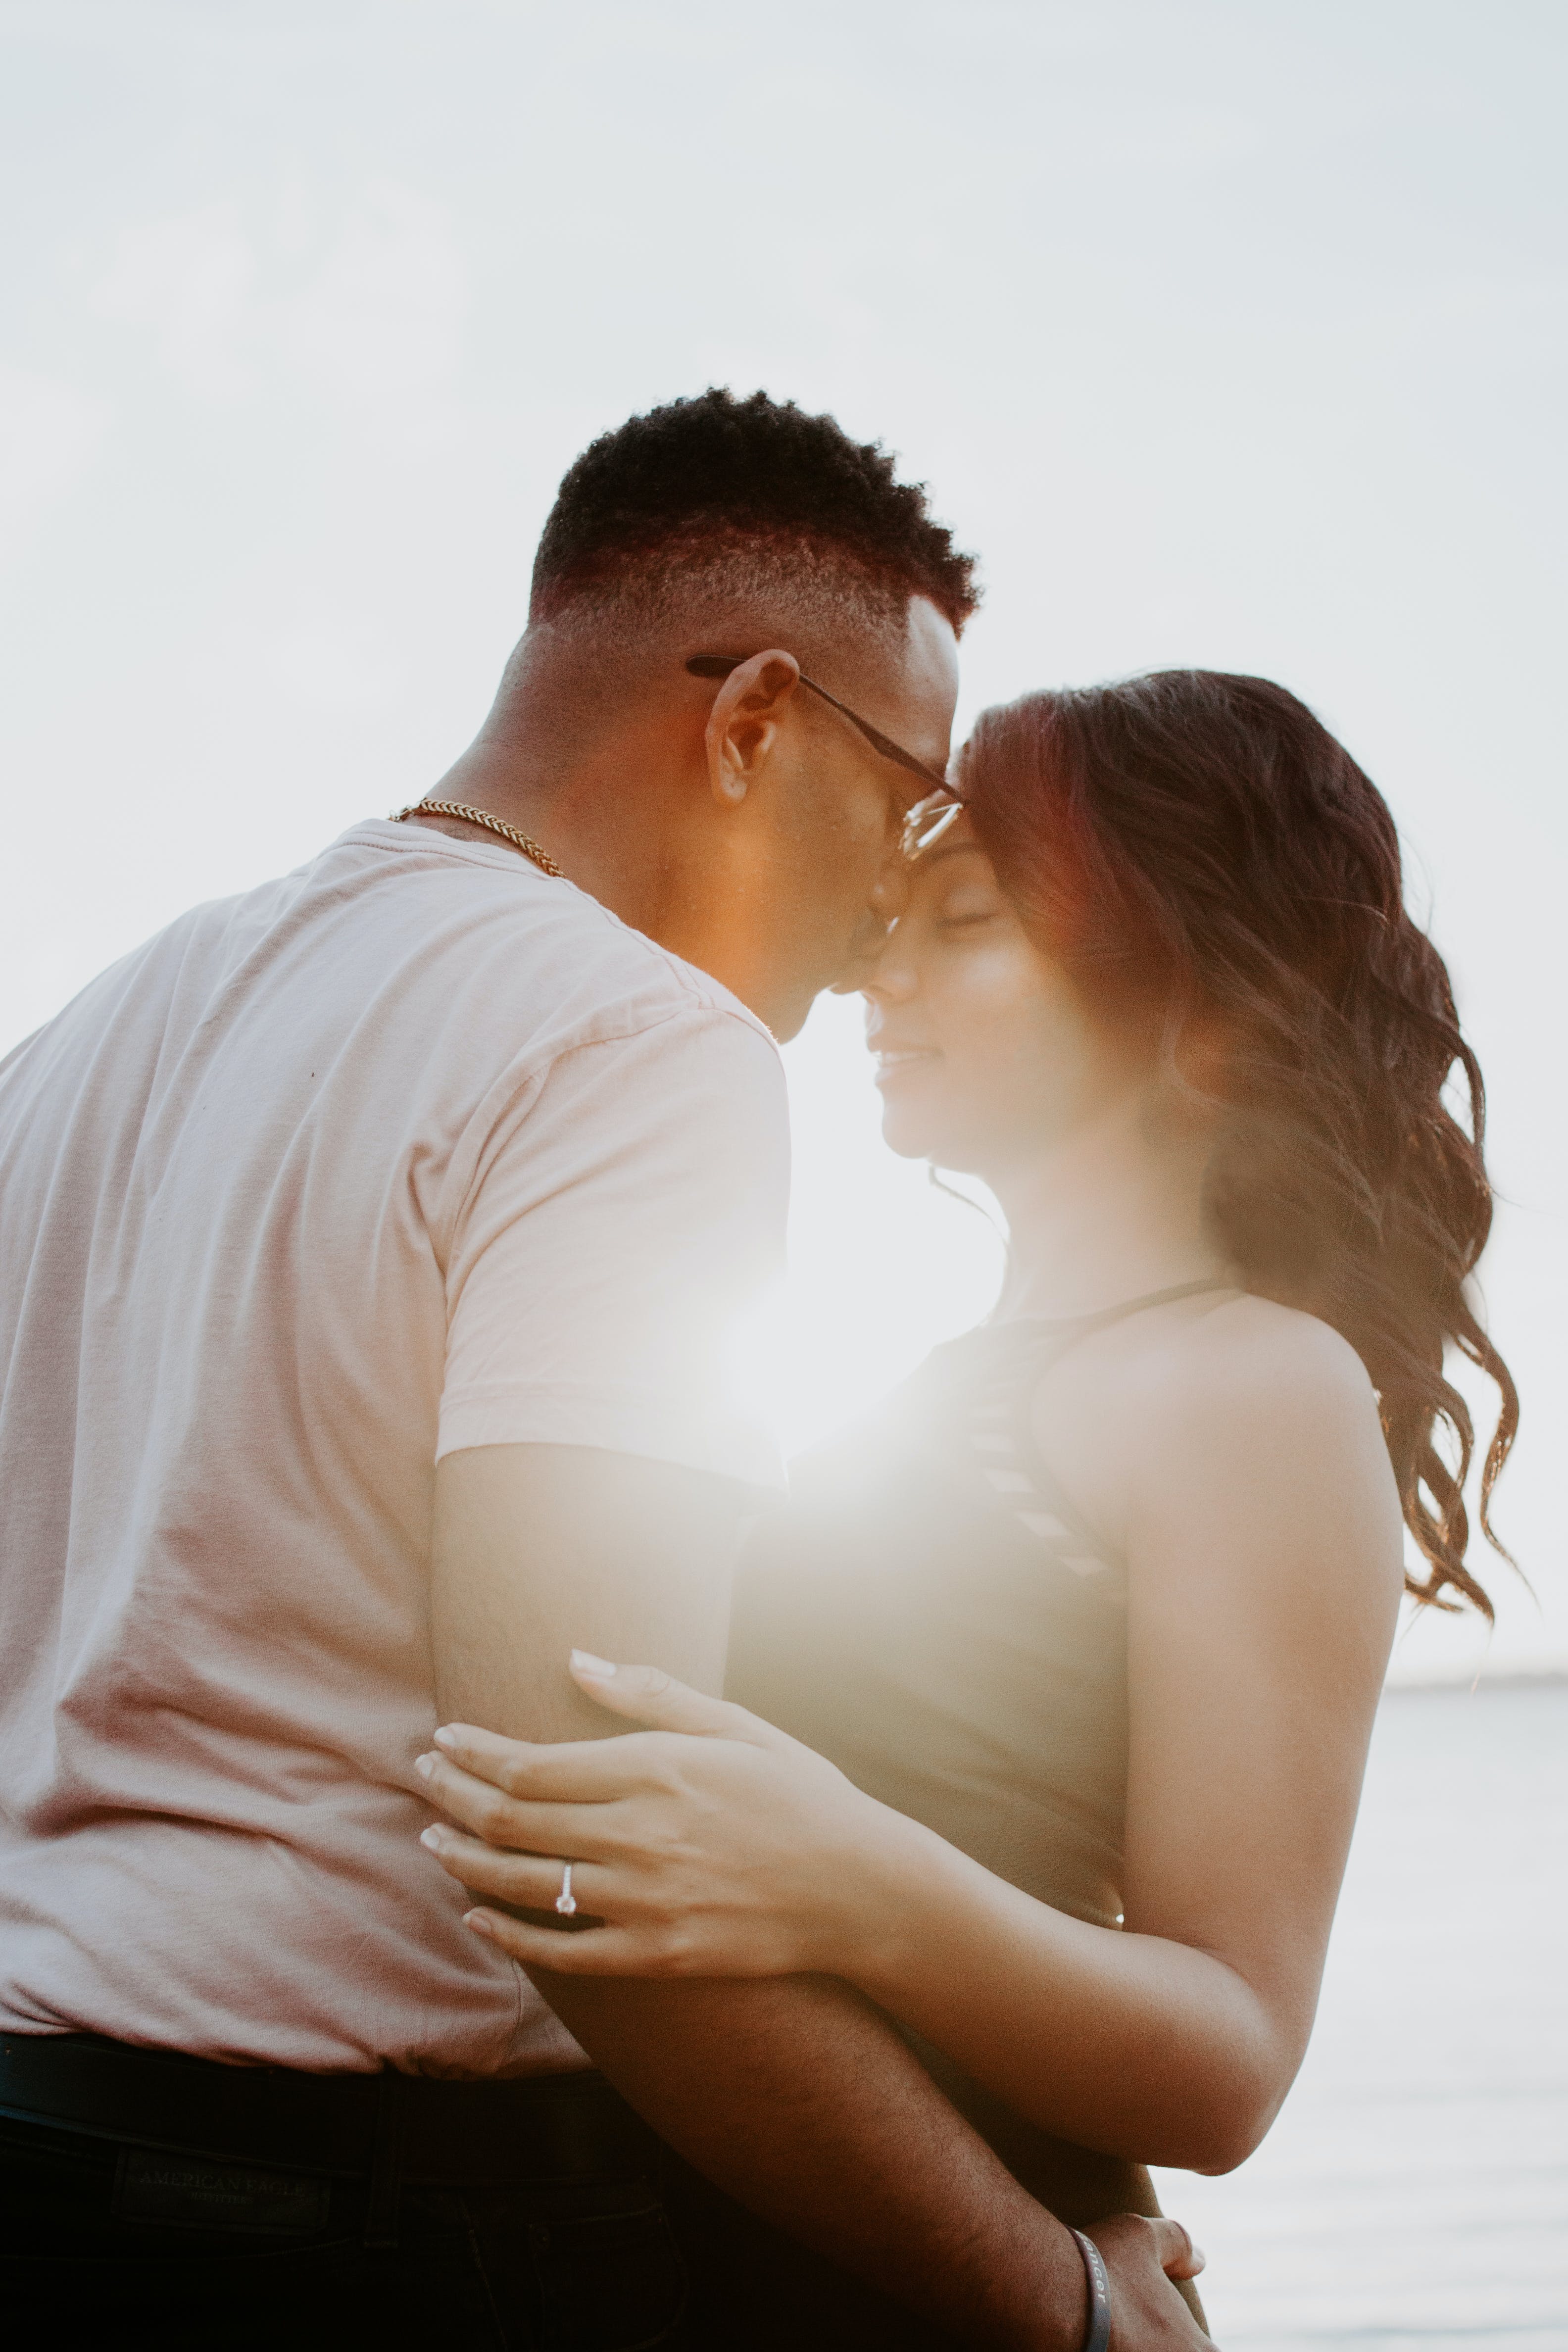 A married couple lovingly embracing while outside | Source: Pexels